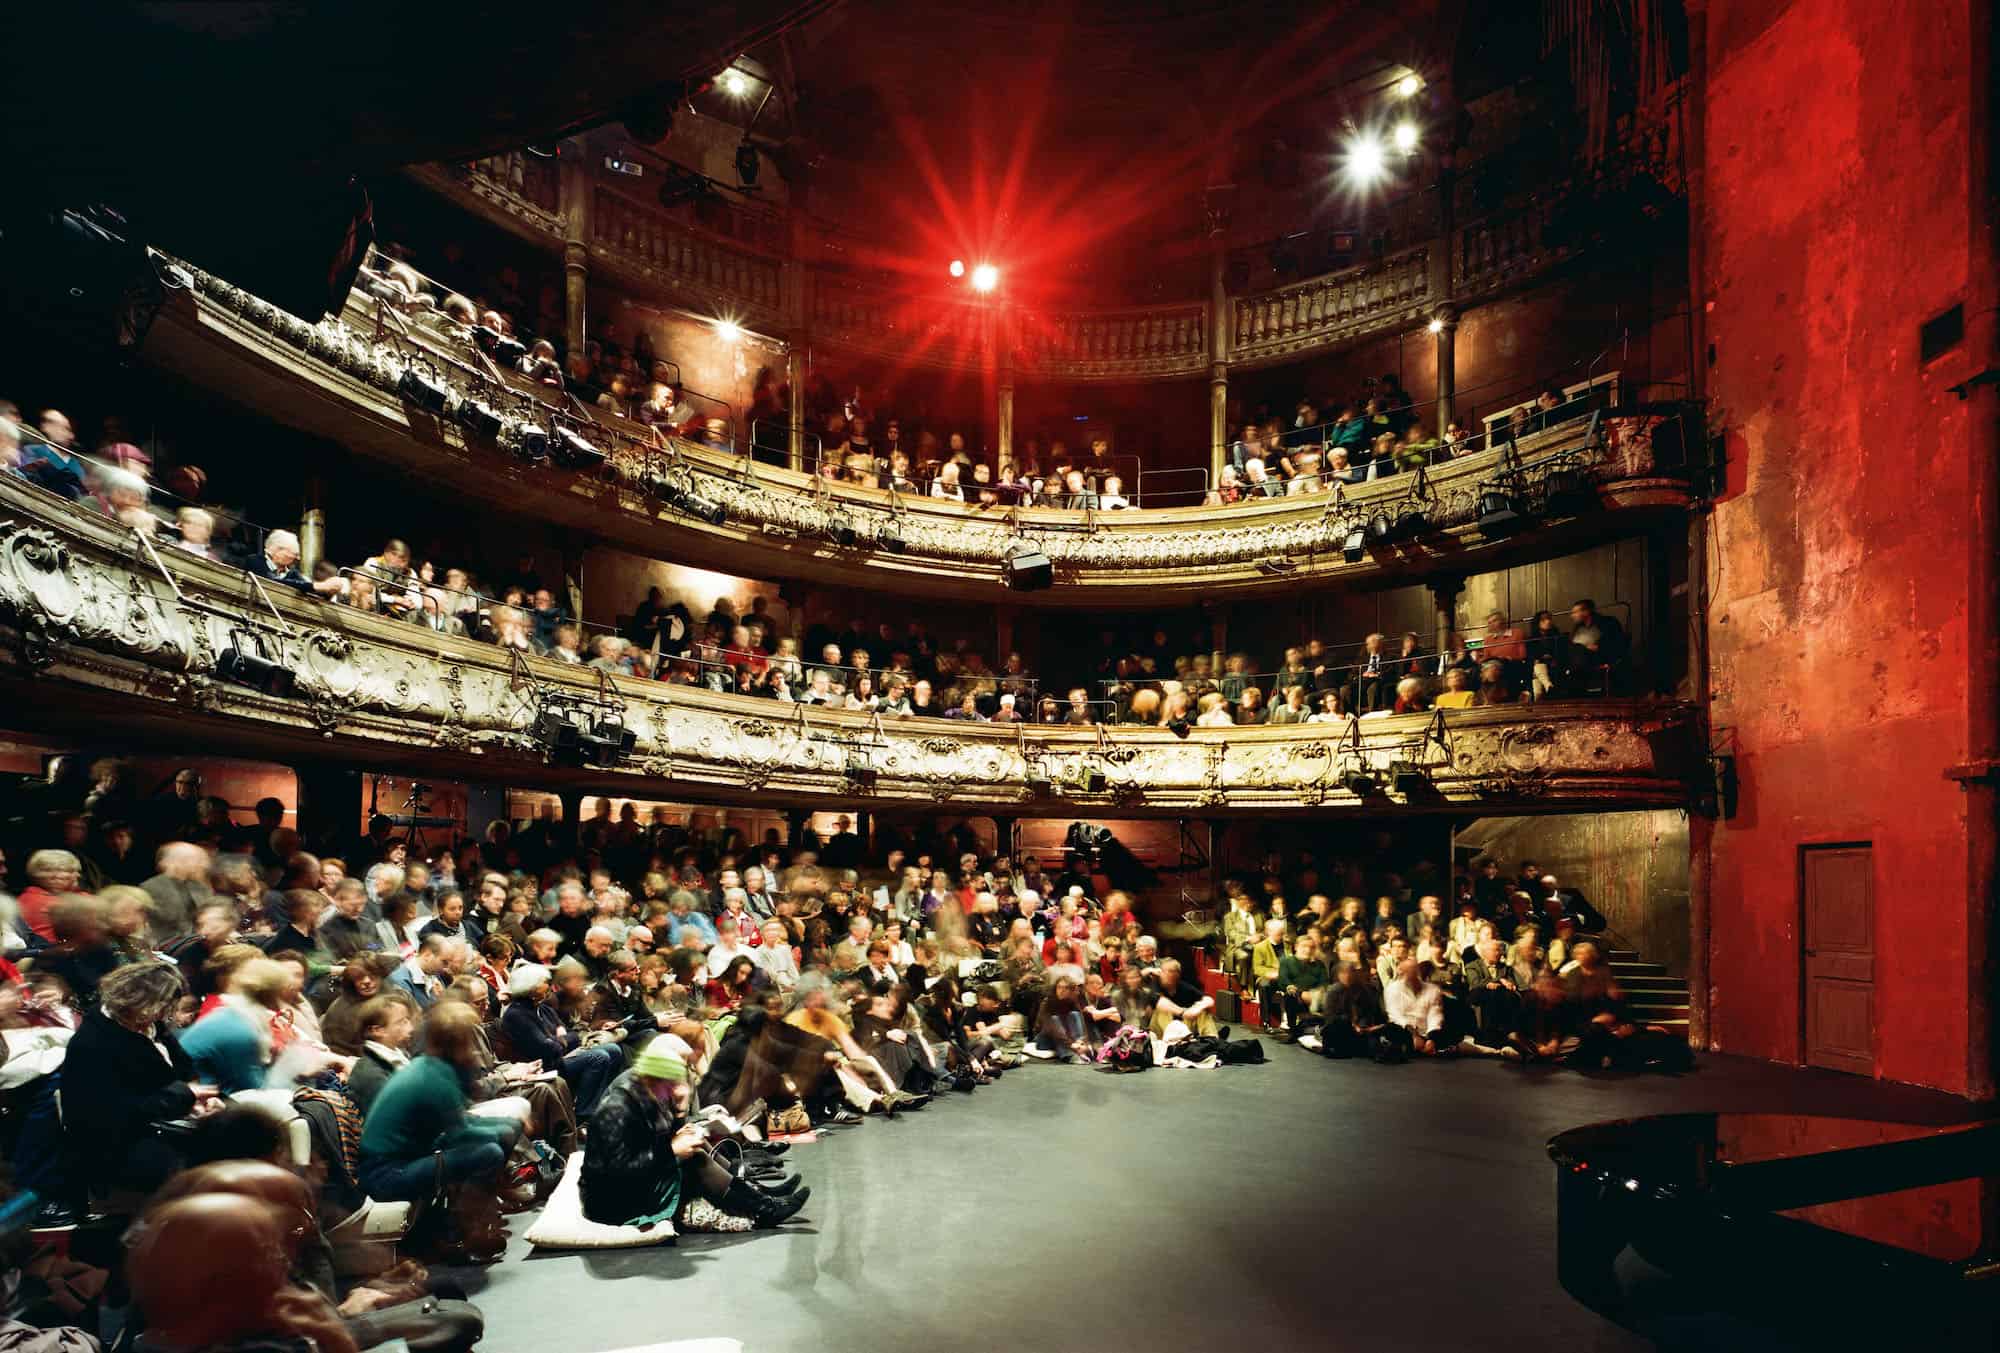 Inside one of the best theatres in Paris, the Bouffes de Nord, with its wooden seating area, which located close to La Chapelle neighborhood.